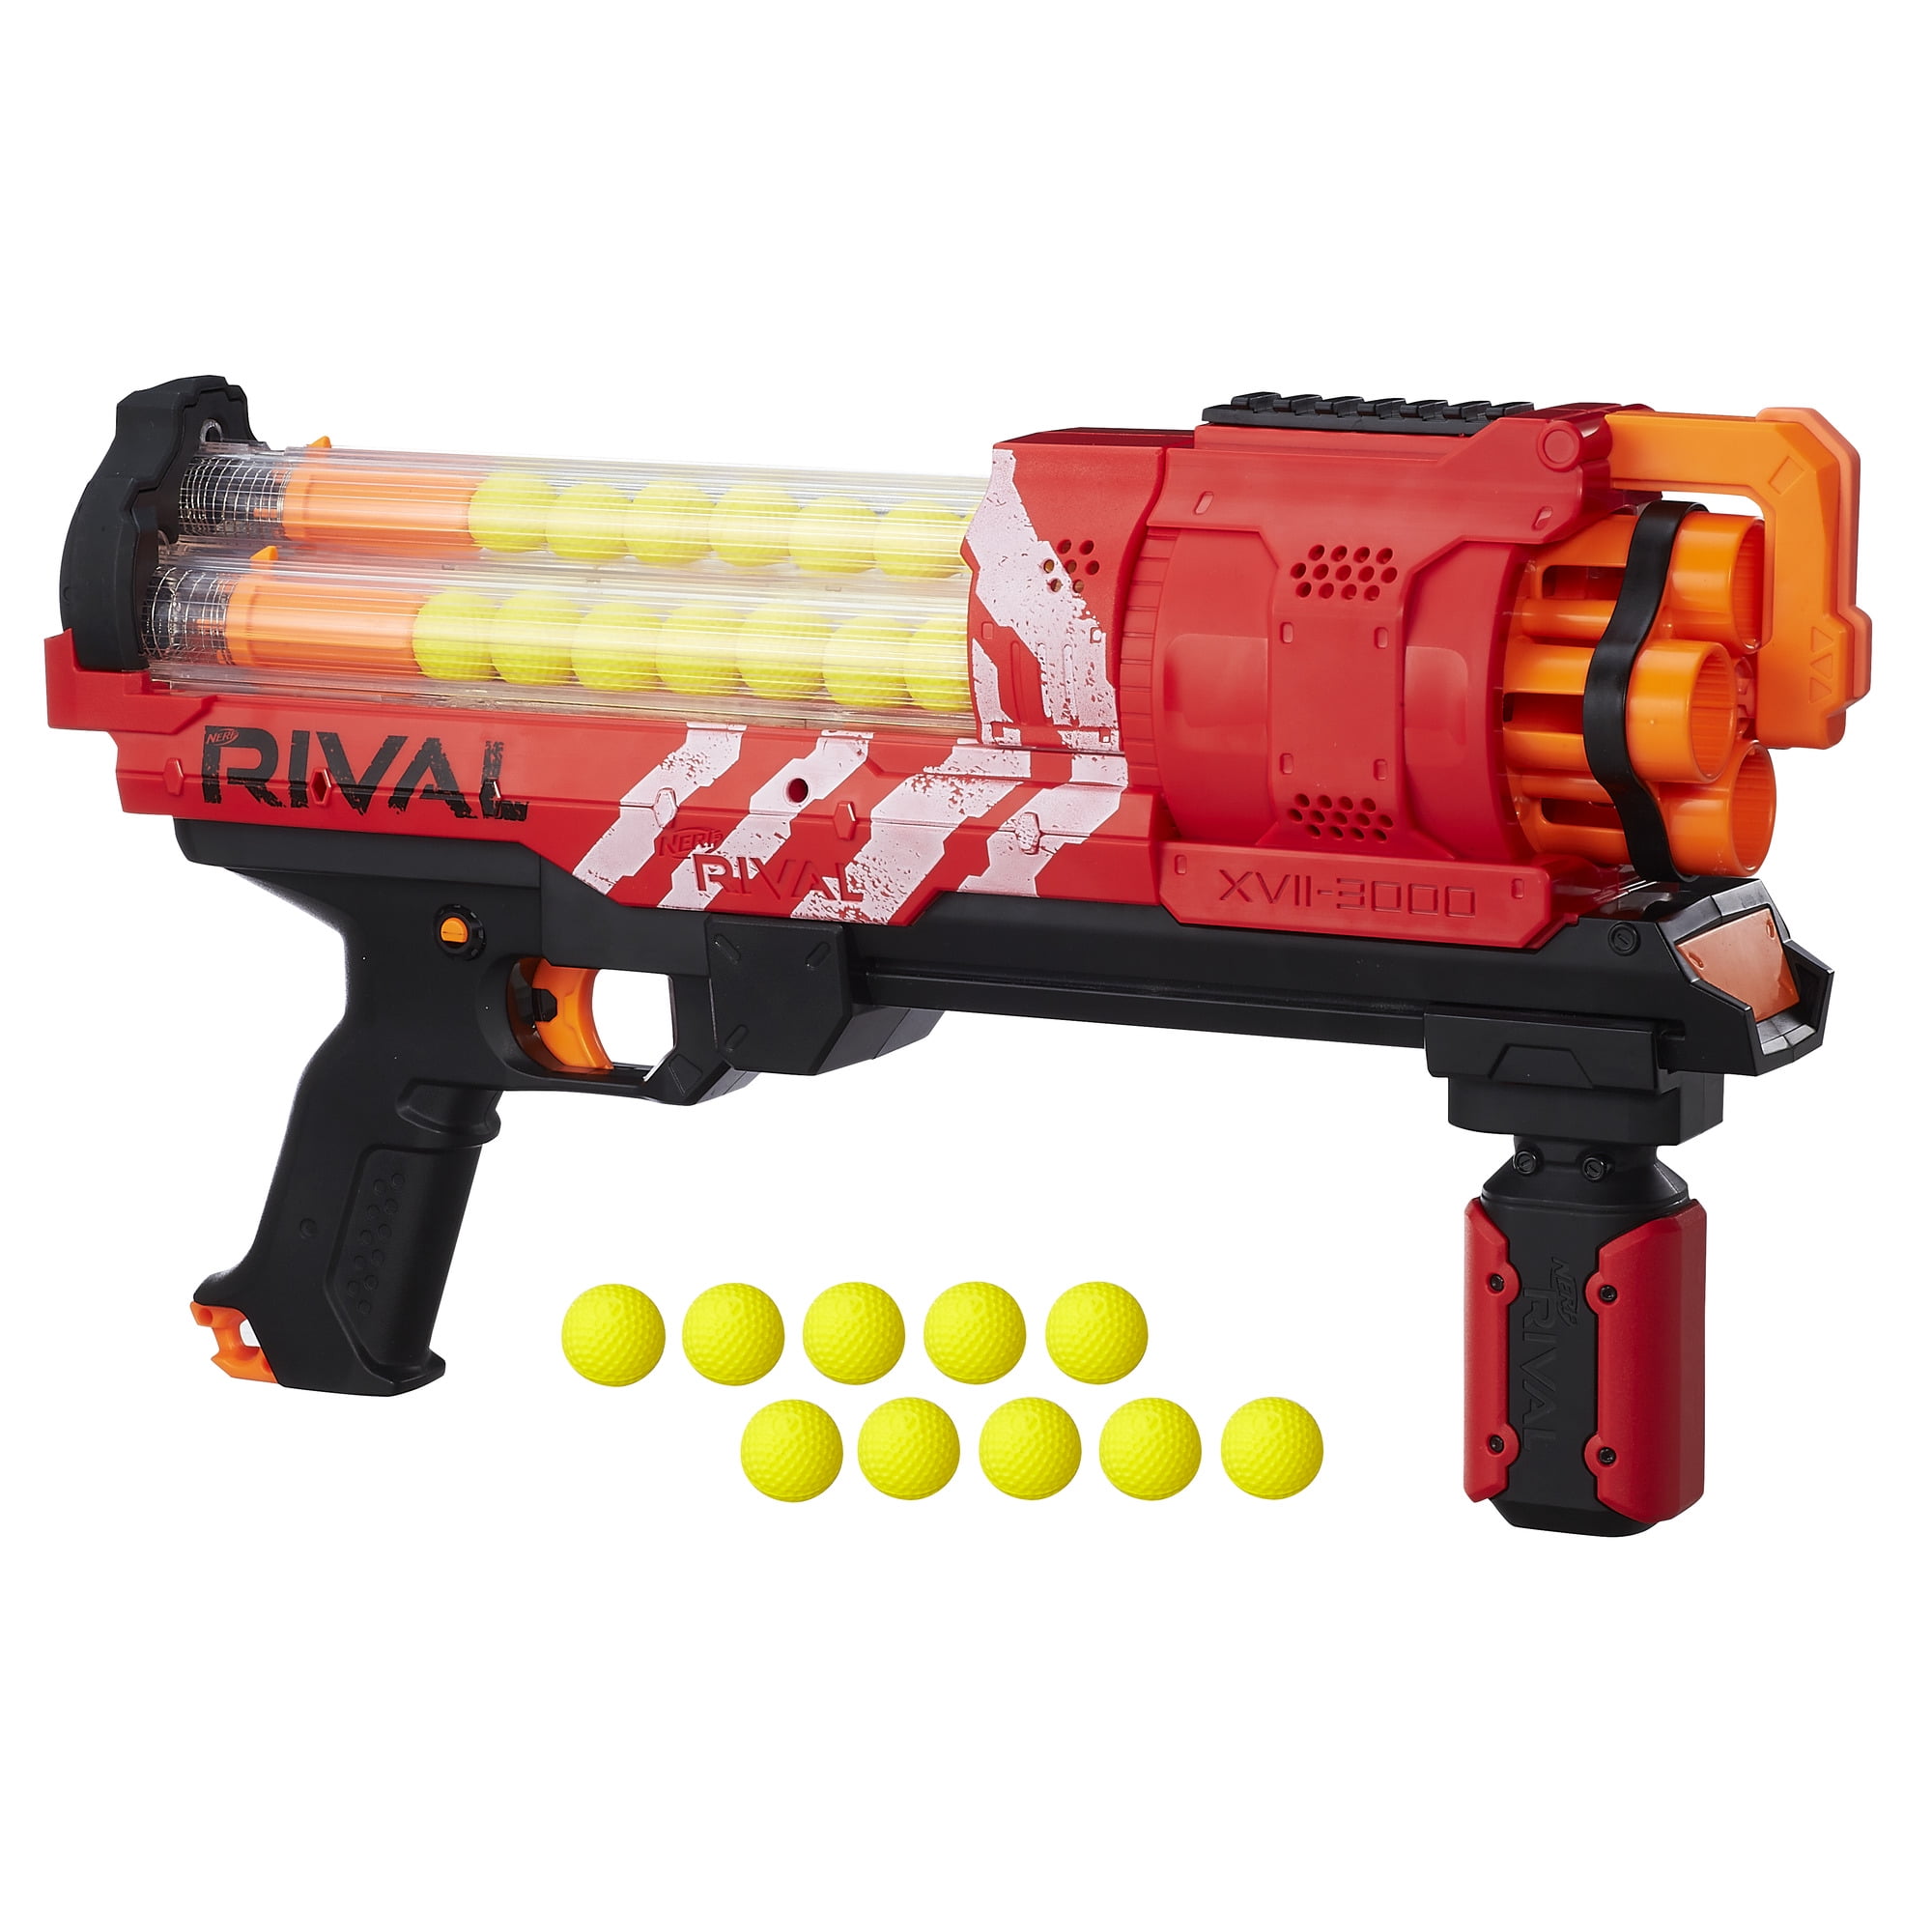 Nerf Rival XVII 3000 (Red), includes Blaster and Rounds - Walmart.com